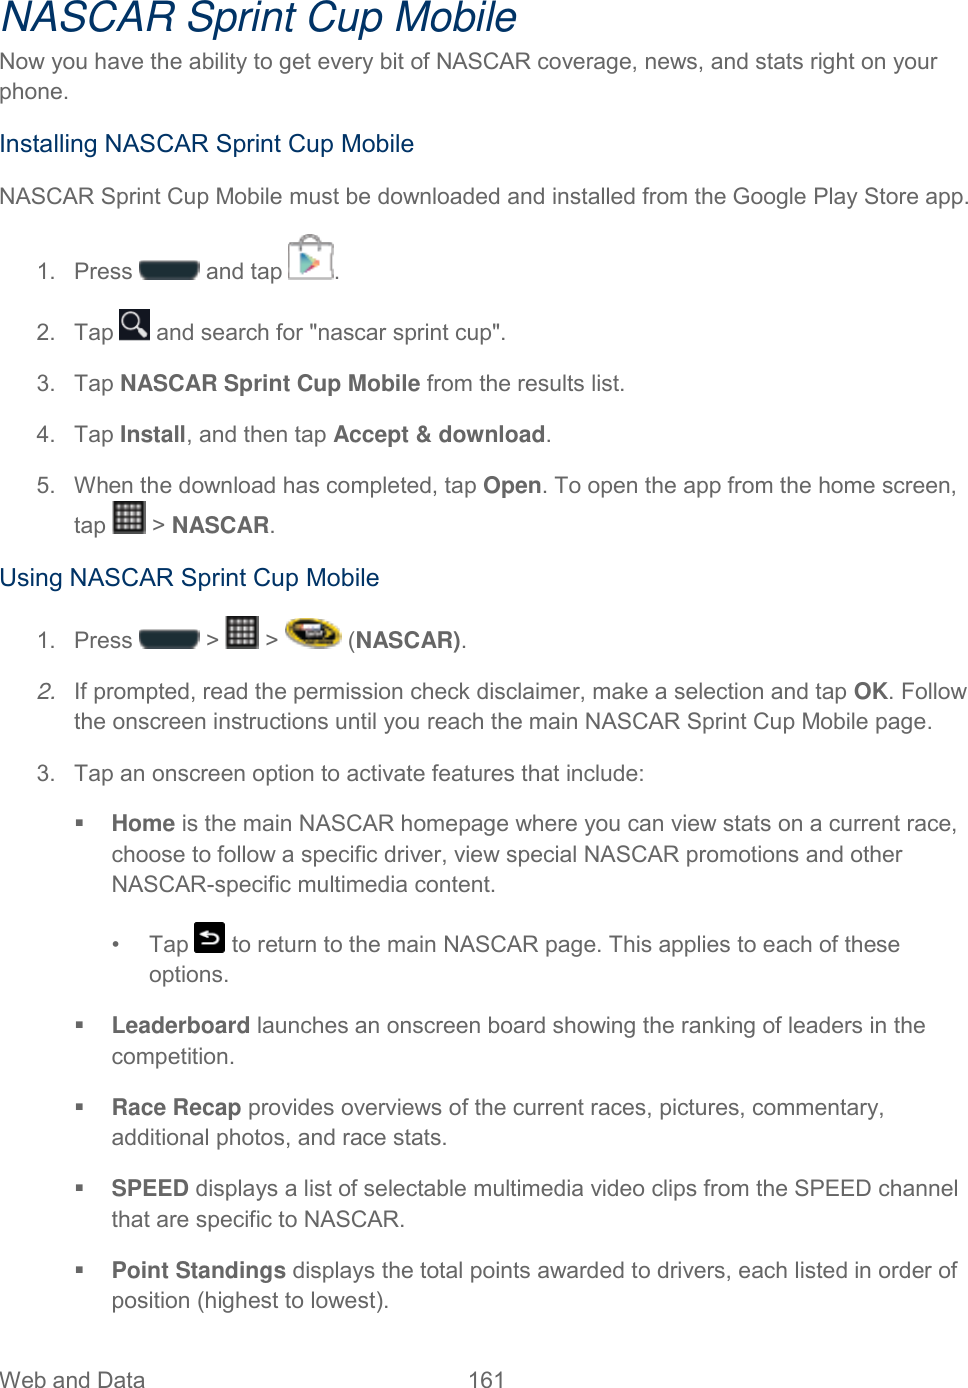 Web and Data  161   NASCAR Sprint Cup Mobile Now you have the ability to get every bit of NASCAR coverage, news, and stats right on your phone. Installing NASCAR Sprint Cup Mobile NASCAR Sprint Cup Mobile must be downloaded and installed from the Google Play Store app. 1.  Press   and tap  . 2.  Tap   and search for &quot;nascar sprint cup&quot;. 3.  Tap NASCAR Sprint Cup Mobile from the results list. 4.  Tap Install, and then tap Accept &amp; download. 5.  When the download has completed, tap Open. To open the app from the home screen, tap   &gt; NASCAR. Using NASCAR Sprint Cup Mobile 1.  Press   &gt;   &gt;   (NASCAR). 2. If prompted, read the permission check disclaimer, make a selection and tap OK. Follow the onscreen instructions until you reach the main NASCAR Sprint Cup Mobile page. 3.  Tap an onscreen option to activate features that include:   Home is the main NASCAR homepage where you can view stats on a current race, choose to follow a specific driver, view special NASCAR promotions and other NASCAR-specific multimedia content. •  Tap   to return to the main NASCAR page. This applies to each of these options.  Leaderboard launches an onscreen board showing the ranking of leaders in the competition.  Race Recap provides overviews of the current races, pictures, commentary, additional photos, and race stats.  SPEED displays a list of selectable multimedia video clips from the SPEED channel that are specific to NASCAR.  Point Standings displays the total points awarded to drivers, each listed in order of position (highest to lowest). 